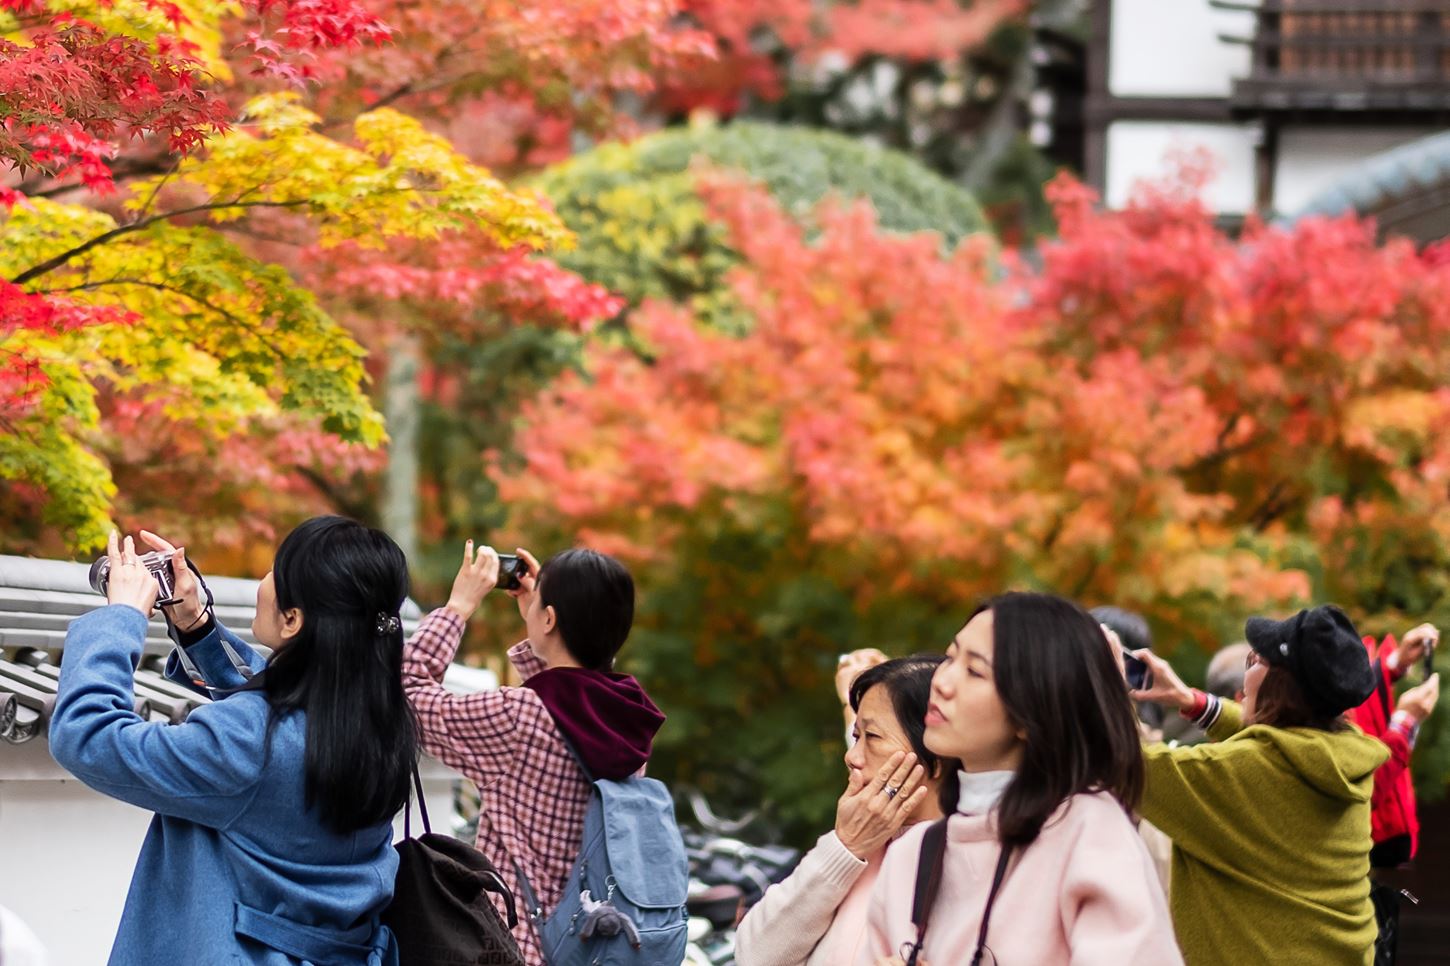 Sightseeing scenery that simply shows the weather in Kyoto in November6